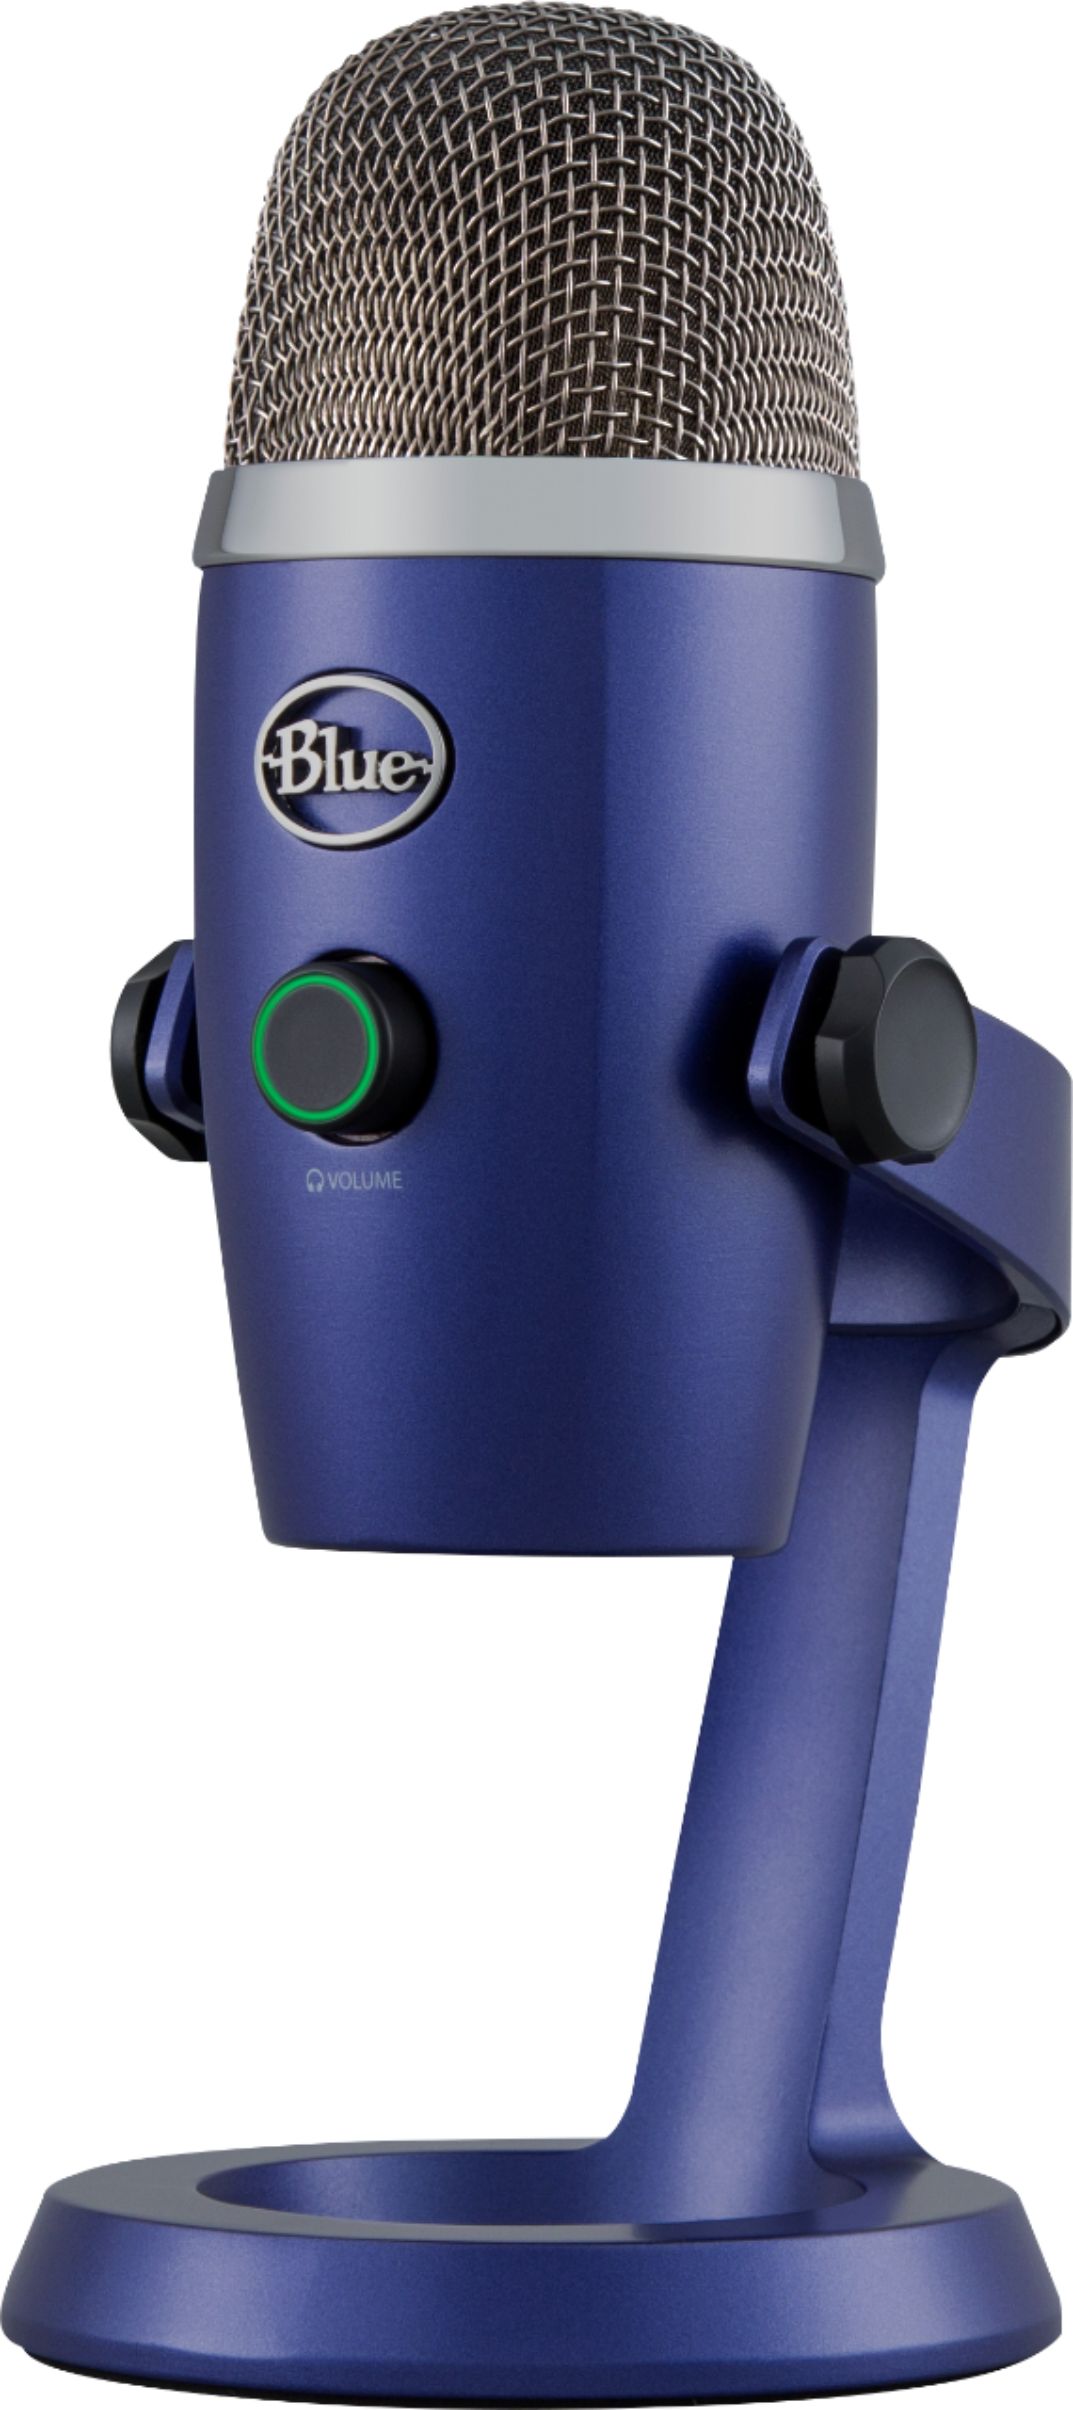 Premium USB Microphone in smaller package - Blue Yeti Nano Review